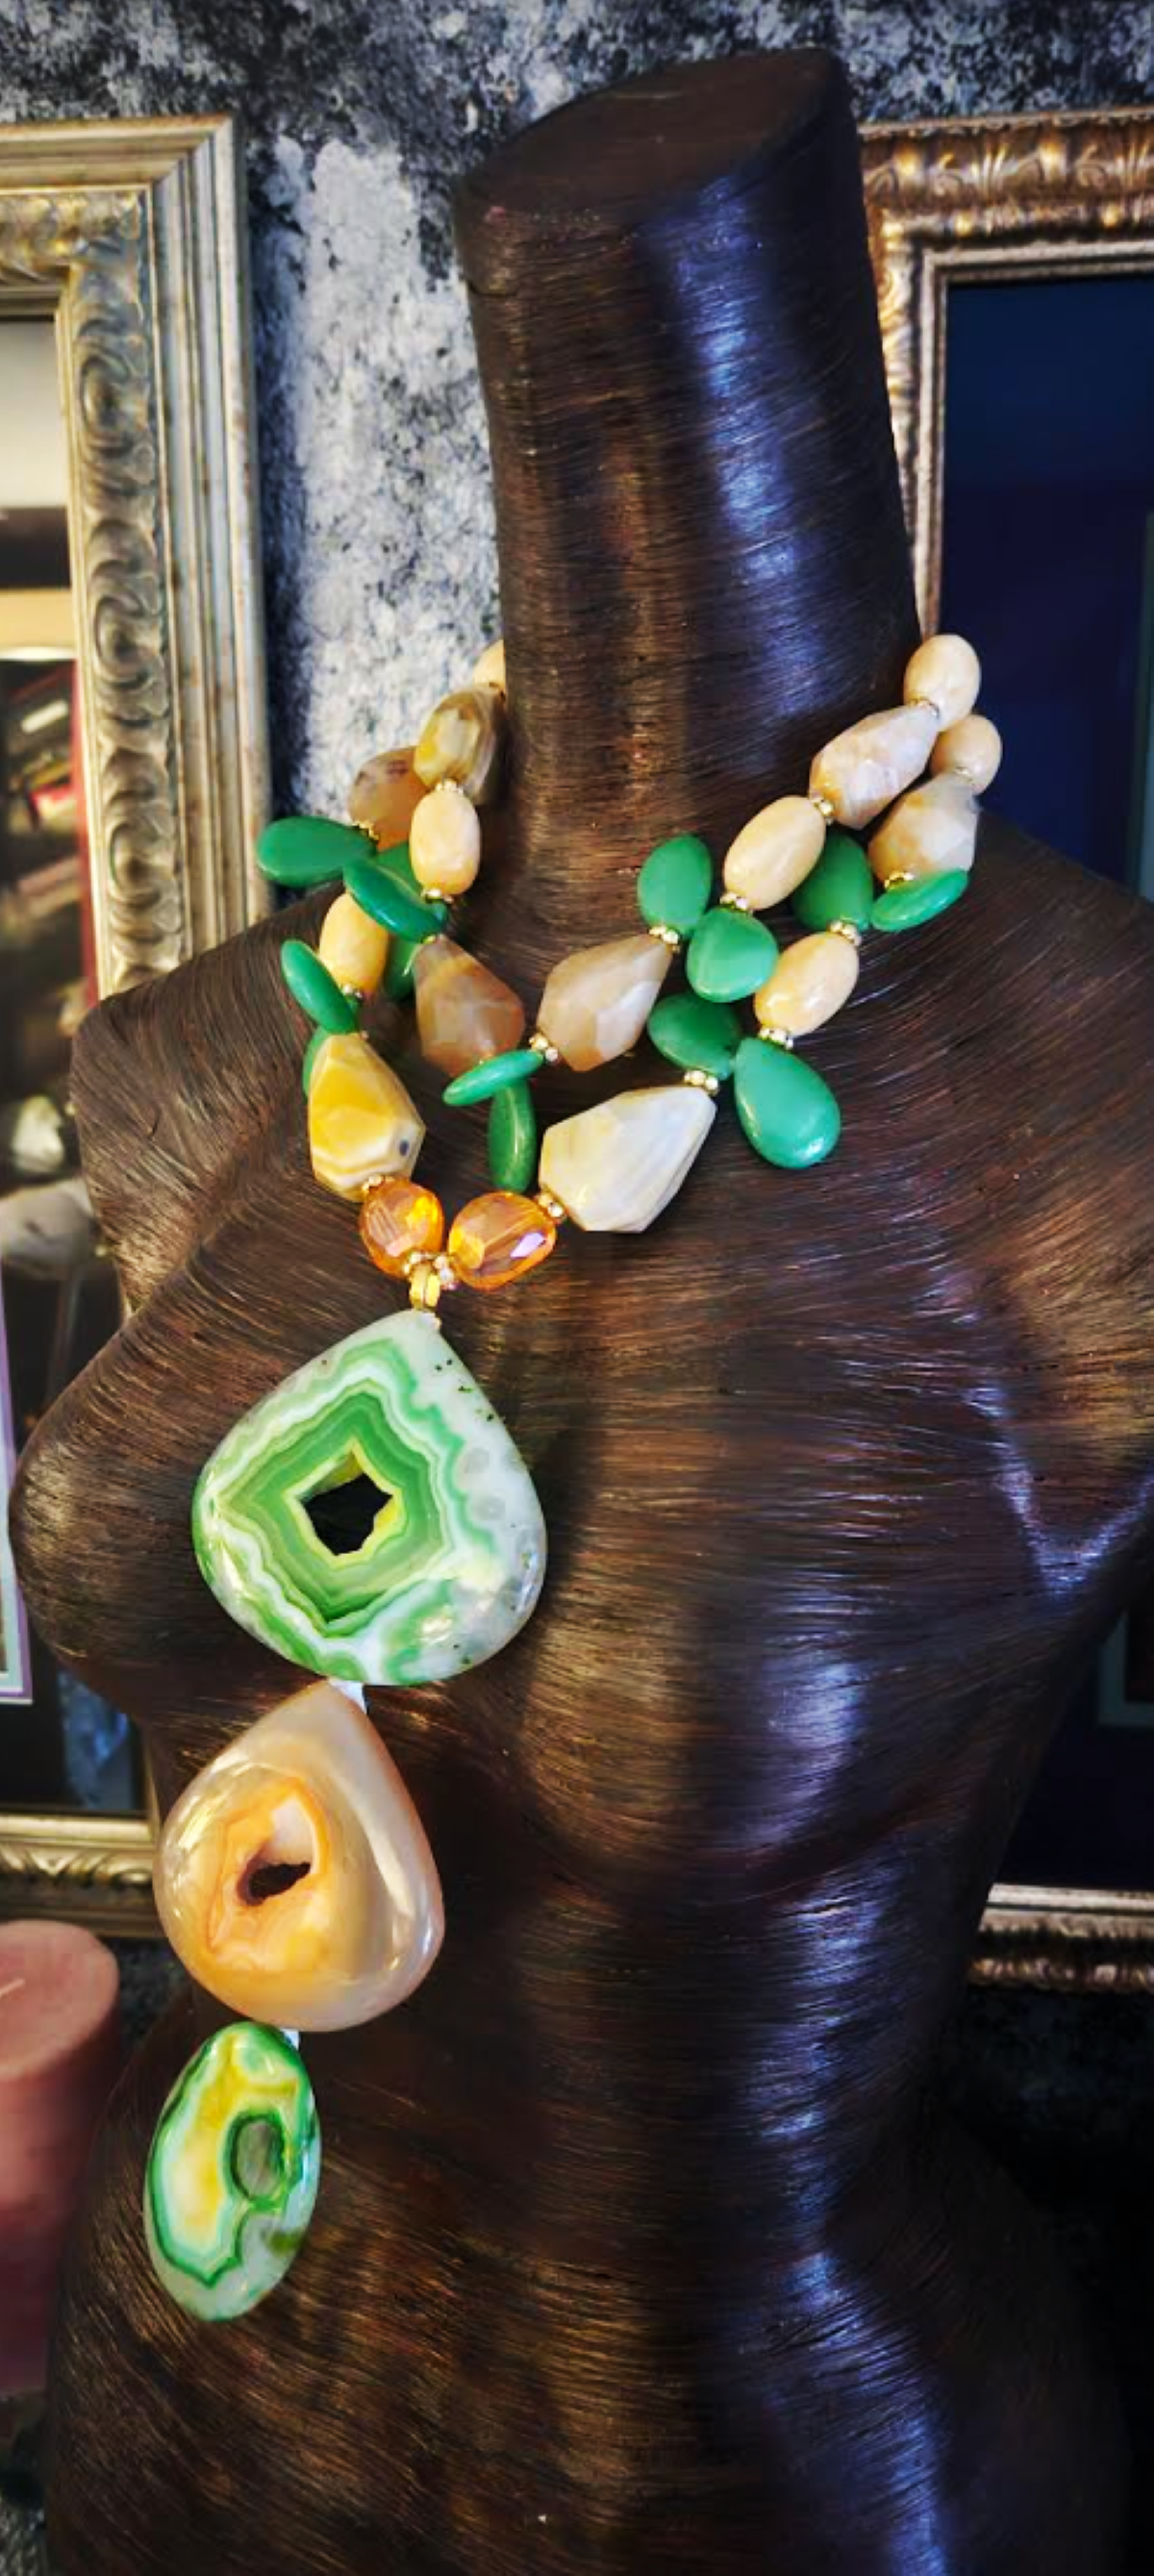 Green & Yellow Druzy Agate Totem on an Agate and Quartz Statement Necklace, OOAK Art to Wear Jewelry, Haute Couture Photoshoot Chest Piece